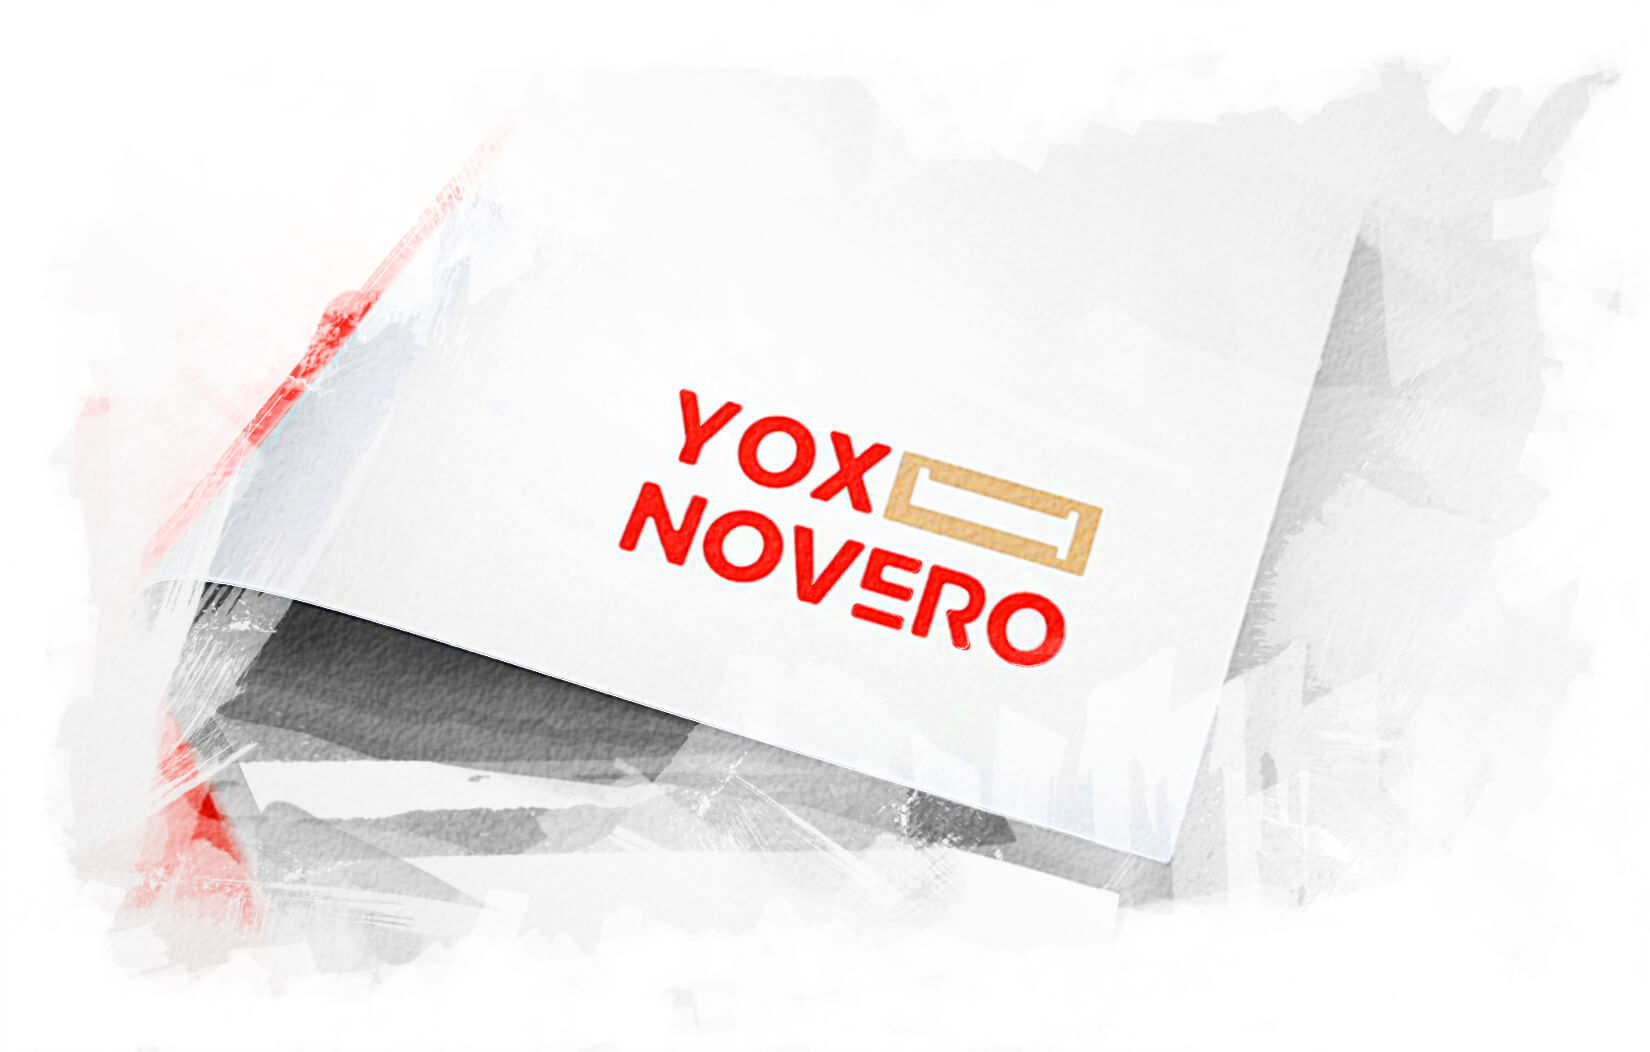 Our story – why Novero?